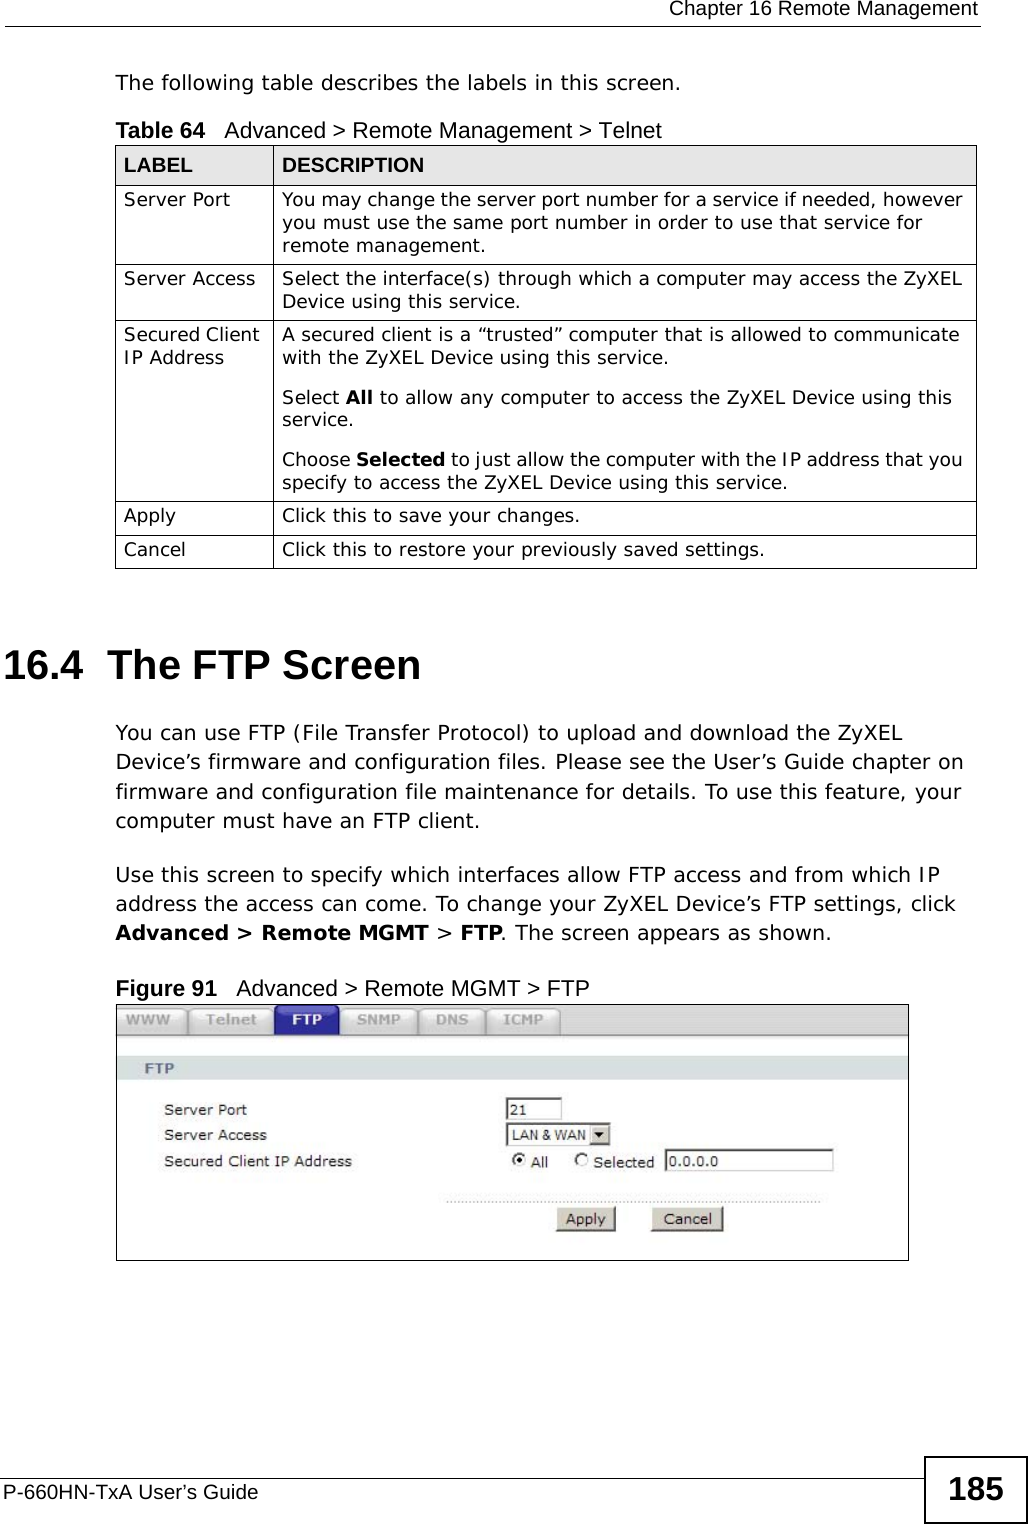  Chapter 16 Remote ManagementP-660HN-TxA User’s Guide 185The following table describes the labels in this screen.16.4  The FTP Screen You can use FTP (File Transfer Protocol) to upload and download the ZyXEL Device’s firmware and configuration files. Please see the User’s Guide chapter on firmware and configuration file maintenance for details. To use this feature, your computer must have an FTP client.Use this screen to specify which interfaces allow FTP access and from which IP address the access can come. To change your ZyXEL Device’s FTP settings, click Advanced &gt; Remote MGMT &gt; FTP. The screen appears as shown.Figure 91   Advanced &gt; Remote MGMT &gt; FTPTable 64   Advanced &gt; Remote Management &gt; TelnetLABEL DESCRIPTIONServer Port You may change the server port number for a service if needed, however you must use the same port number in order to use that service for remote management.Server Access Select the interface(s) through which a computer may access the ZyXEL Device using this service.Secured Client IP Address A secured client is a “trusted” computer that is allowed to communicate with the ZyXEL Device using this service. Select All to allow any computer to access the ZyXEL Device using this service.Choose Selected to just allow the computer with the IP address that you specify to access the ZyXEL Device using this service.Apply Click this to save your changes.Cancel Click this to restore your previously saved settings.